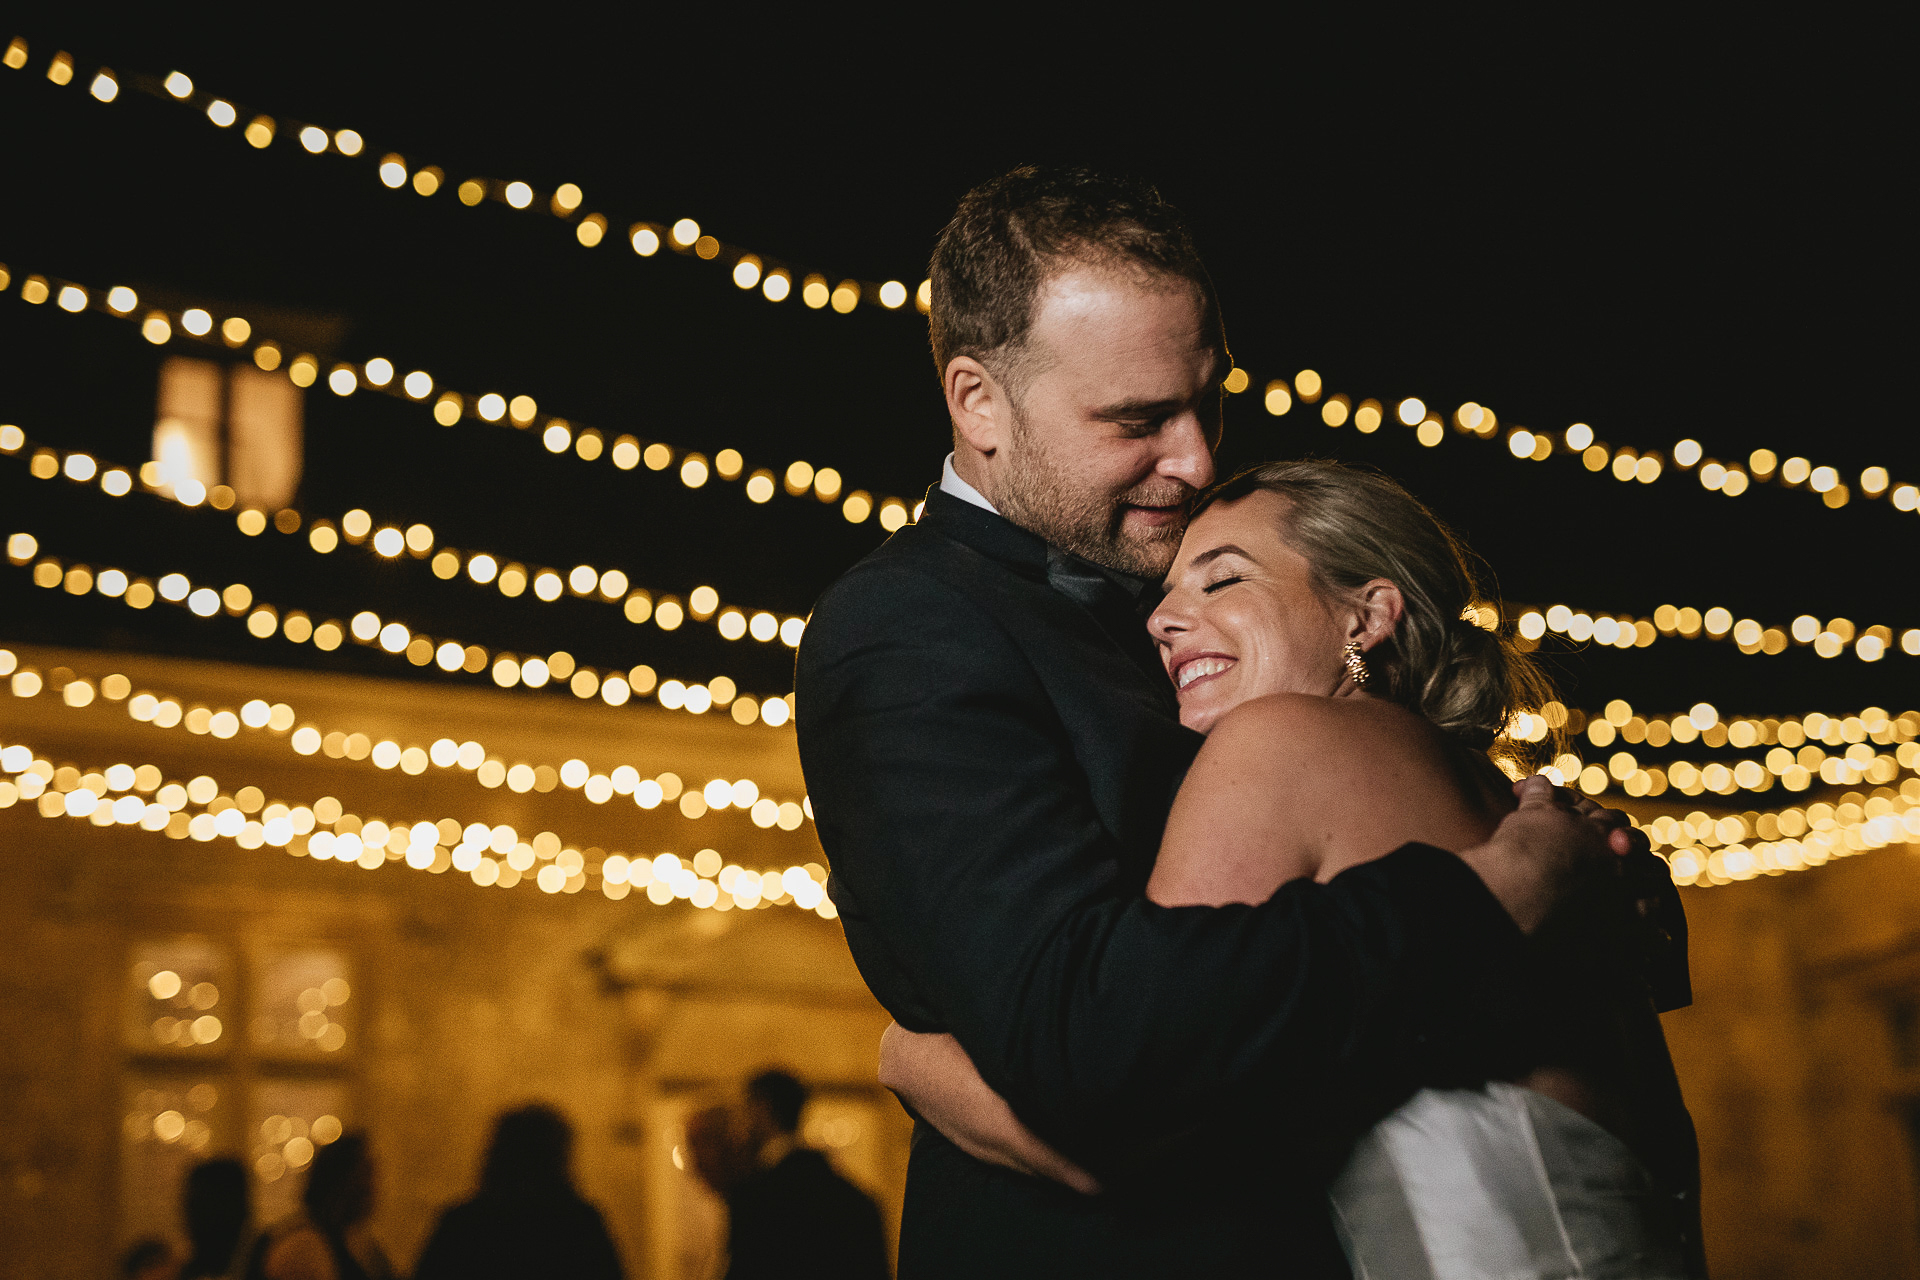 Bride and groom smiling and cuddling with festoon lights behind